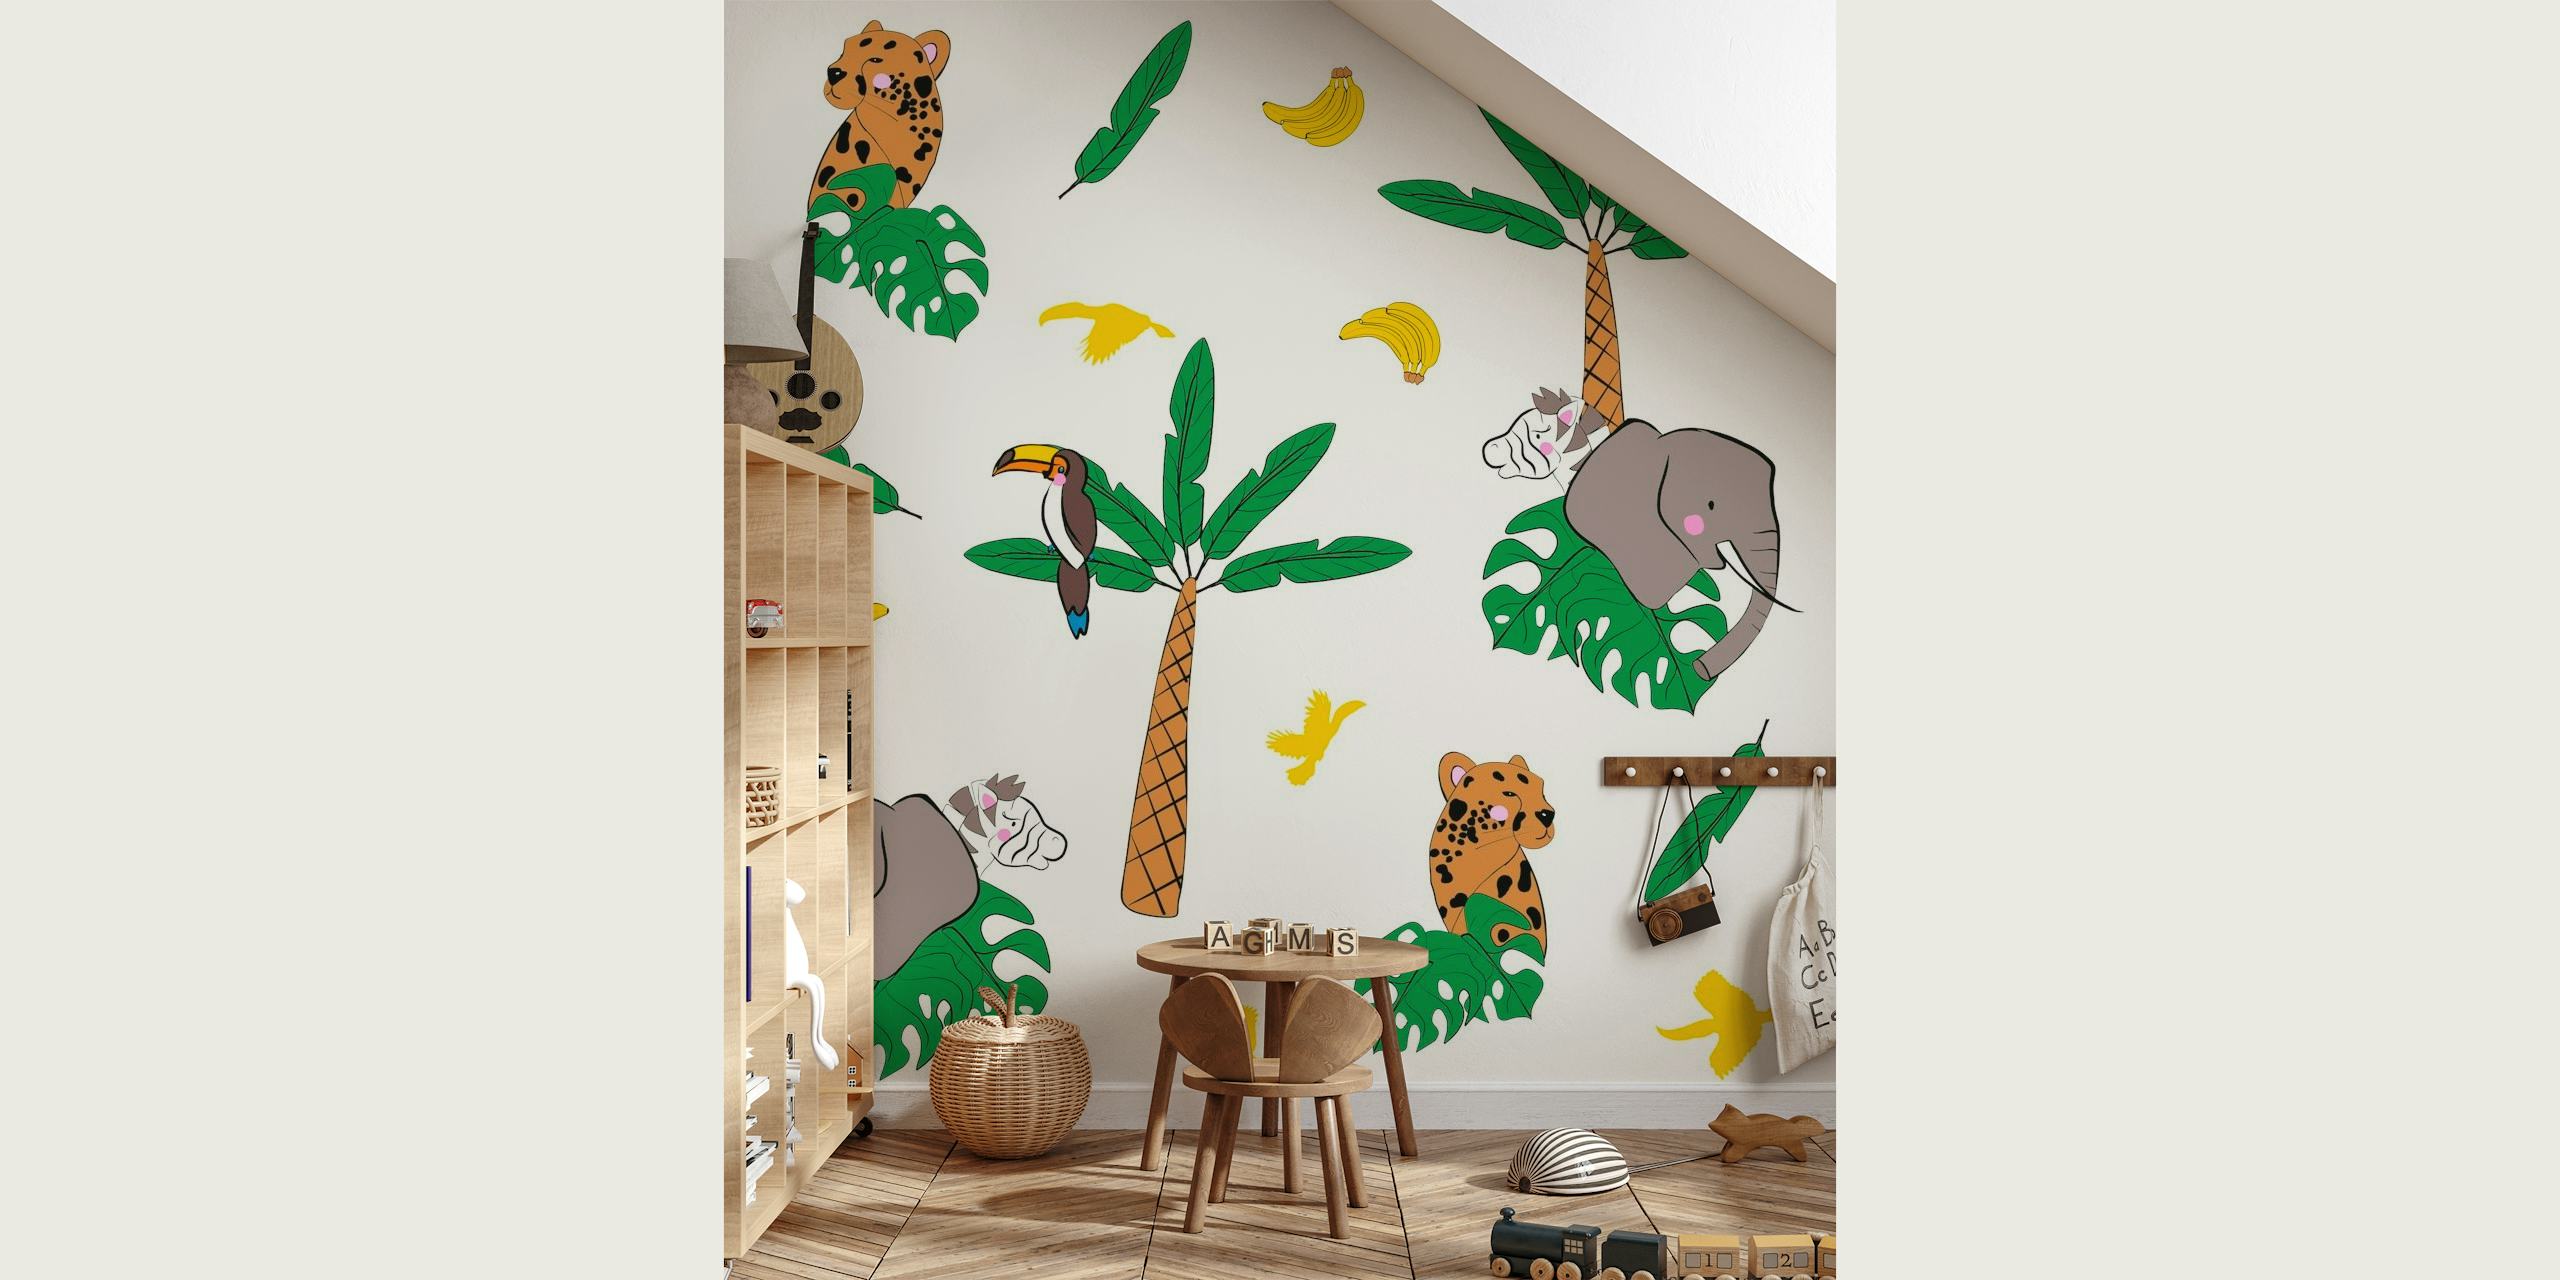 Colorful jungle safari wall mural with leopards, elephants, palm trees, bananas, and butterflies